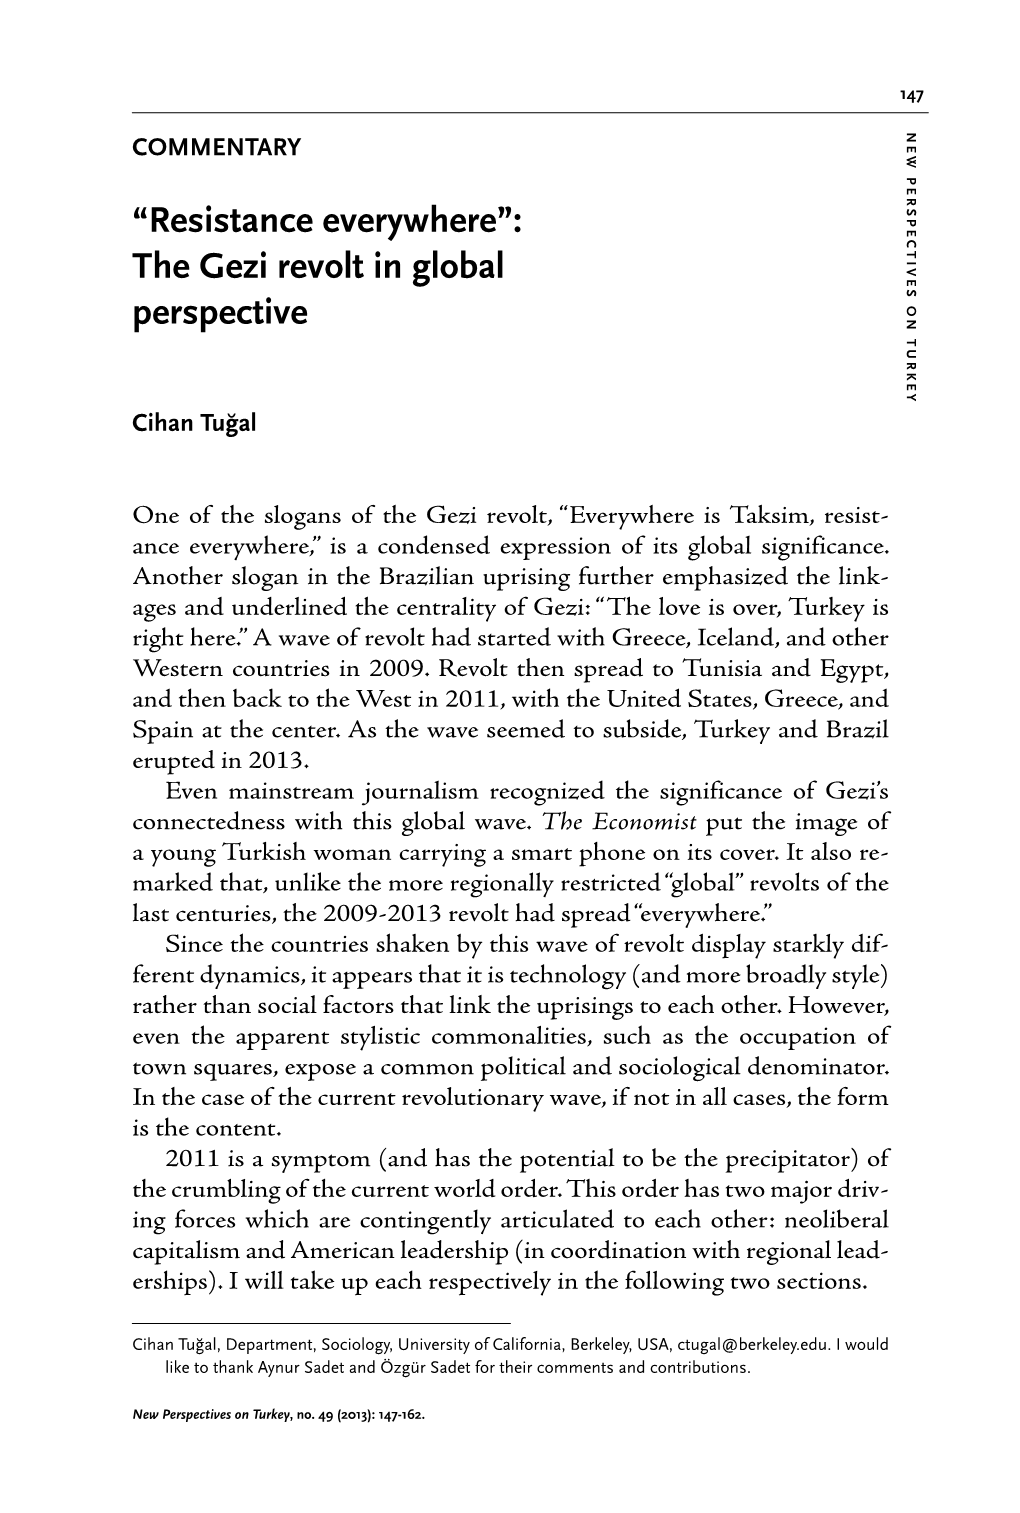 “Resistance Everywhere”: the Gezi Revolt in Global Perspective